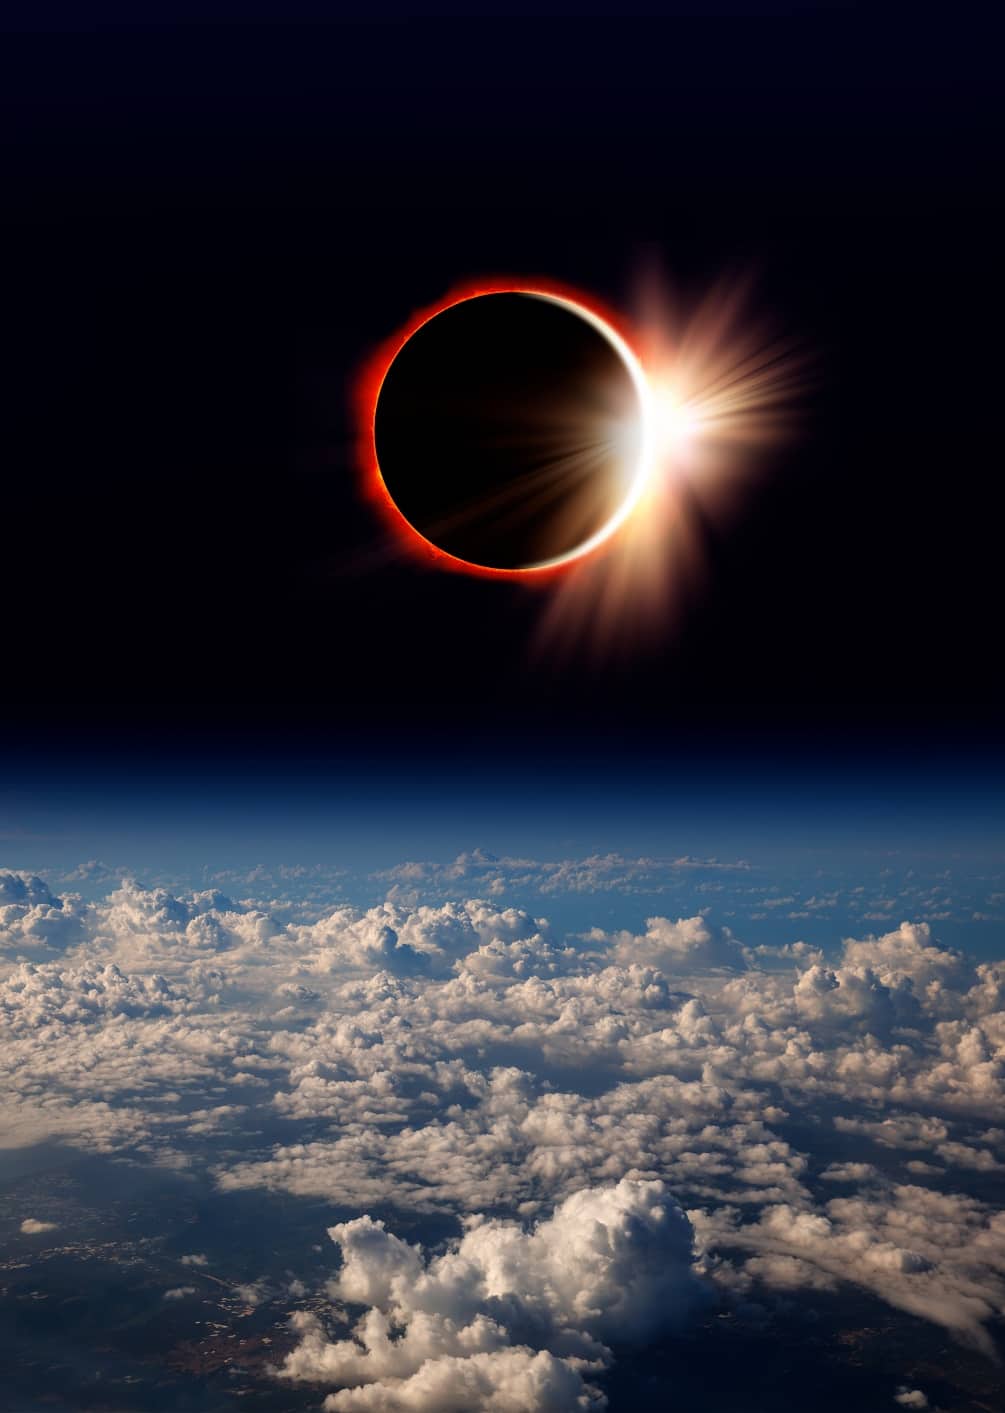 Eclipse - A Message From The Gods? Here’s How Ancient Cultures Interpreted Solar Eclipses